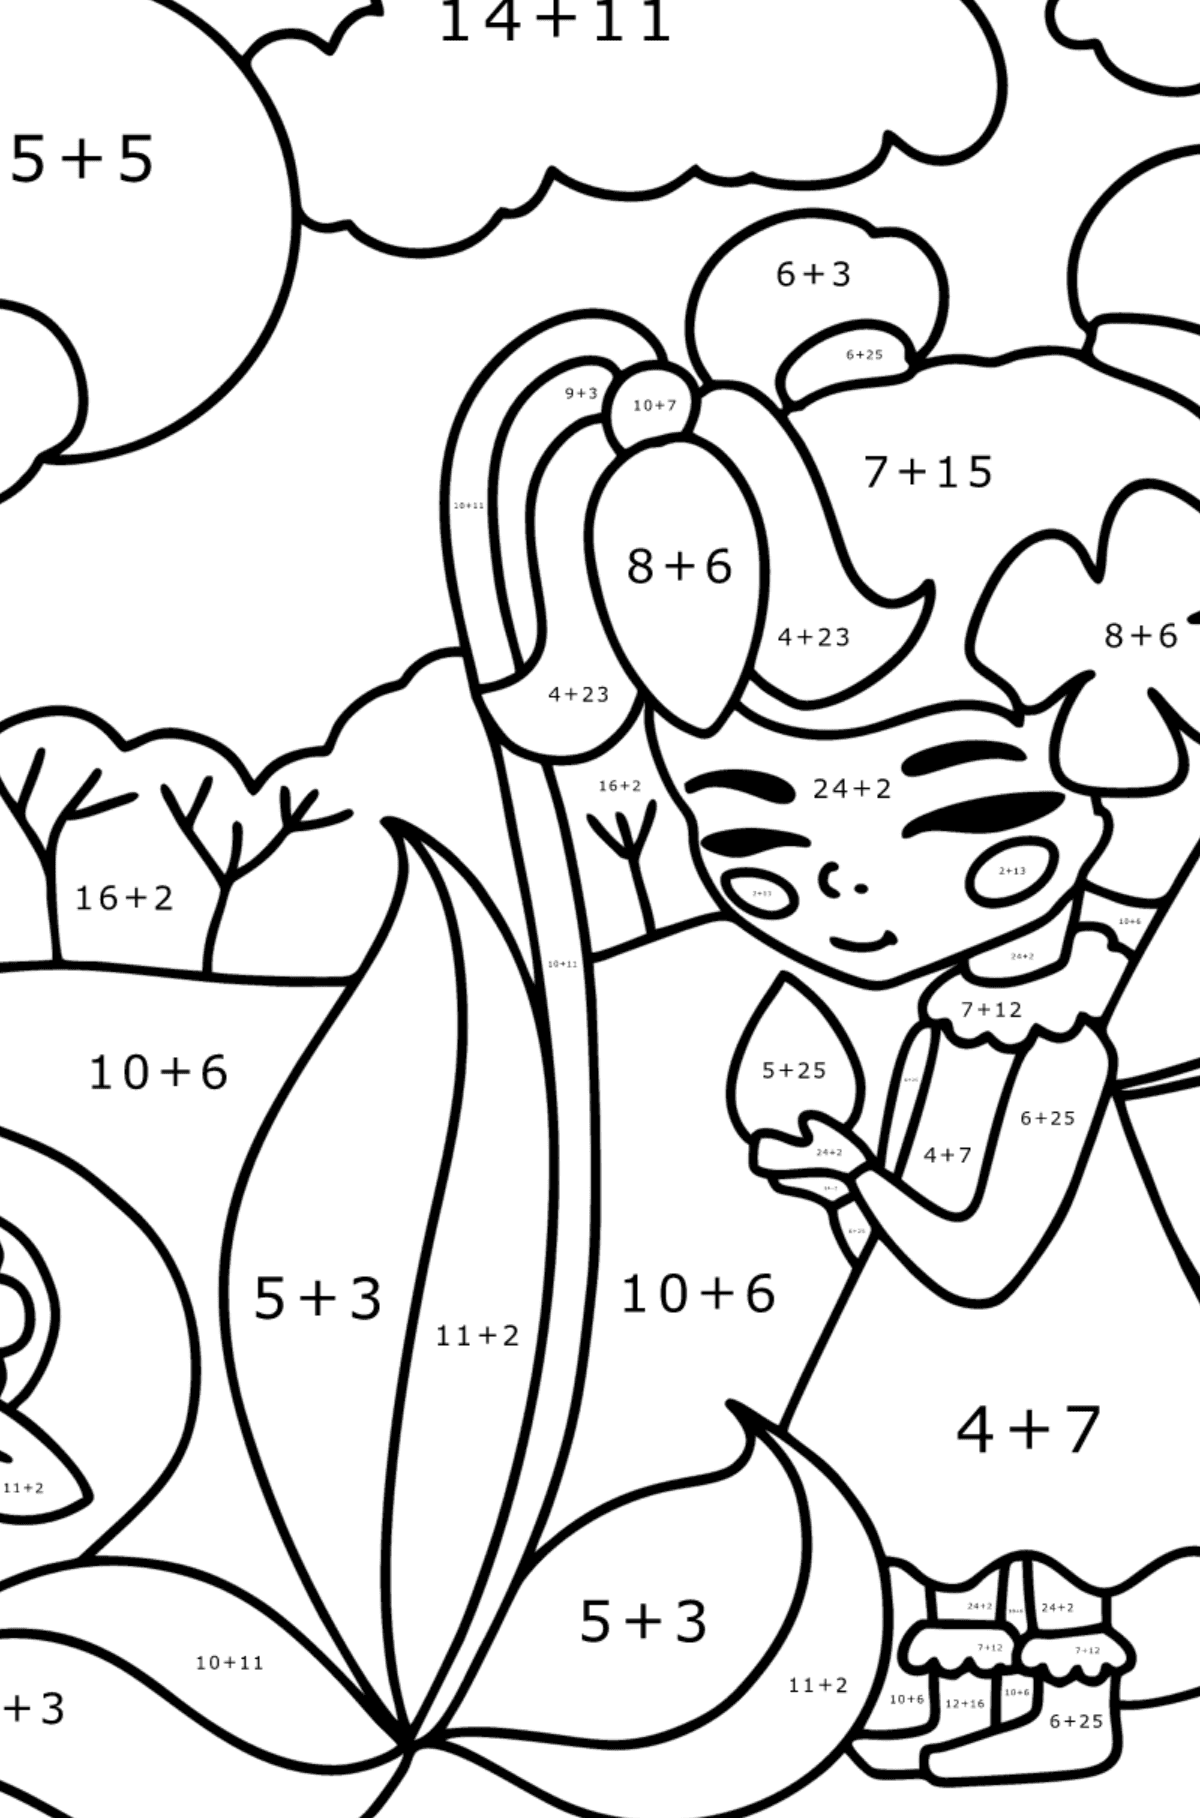 Fairy on a forest path coloring page - Math Coloring - Addition for Kids